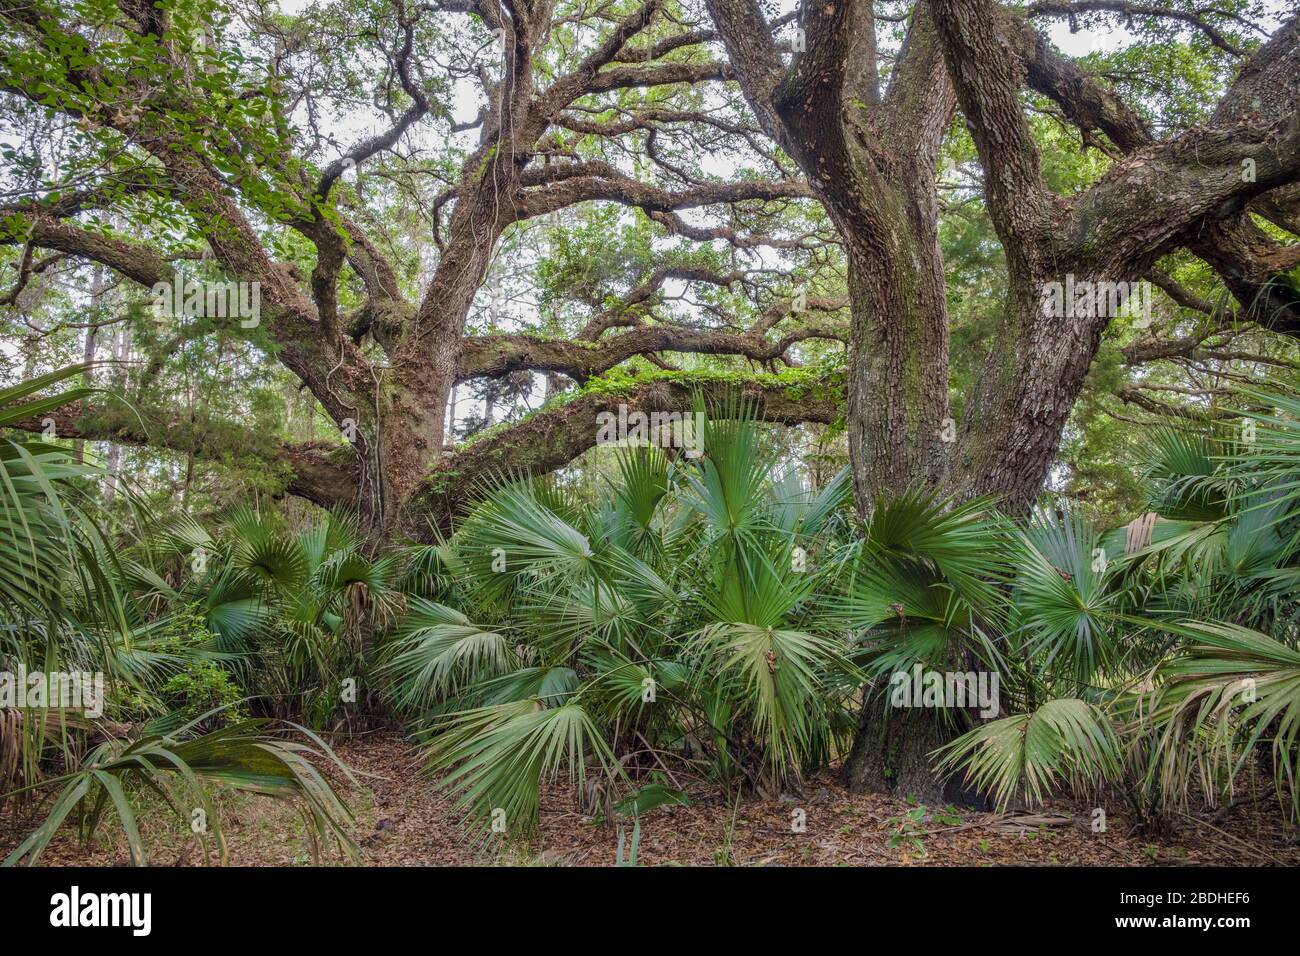 Southern Live Oak trees and palms. Looking up into tree branches. Halpata Tastanaki Preserve. Public land in Dunnellon, Florida. Marion County. Stock Photo